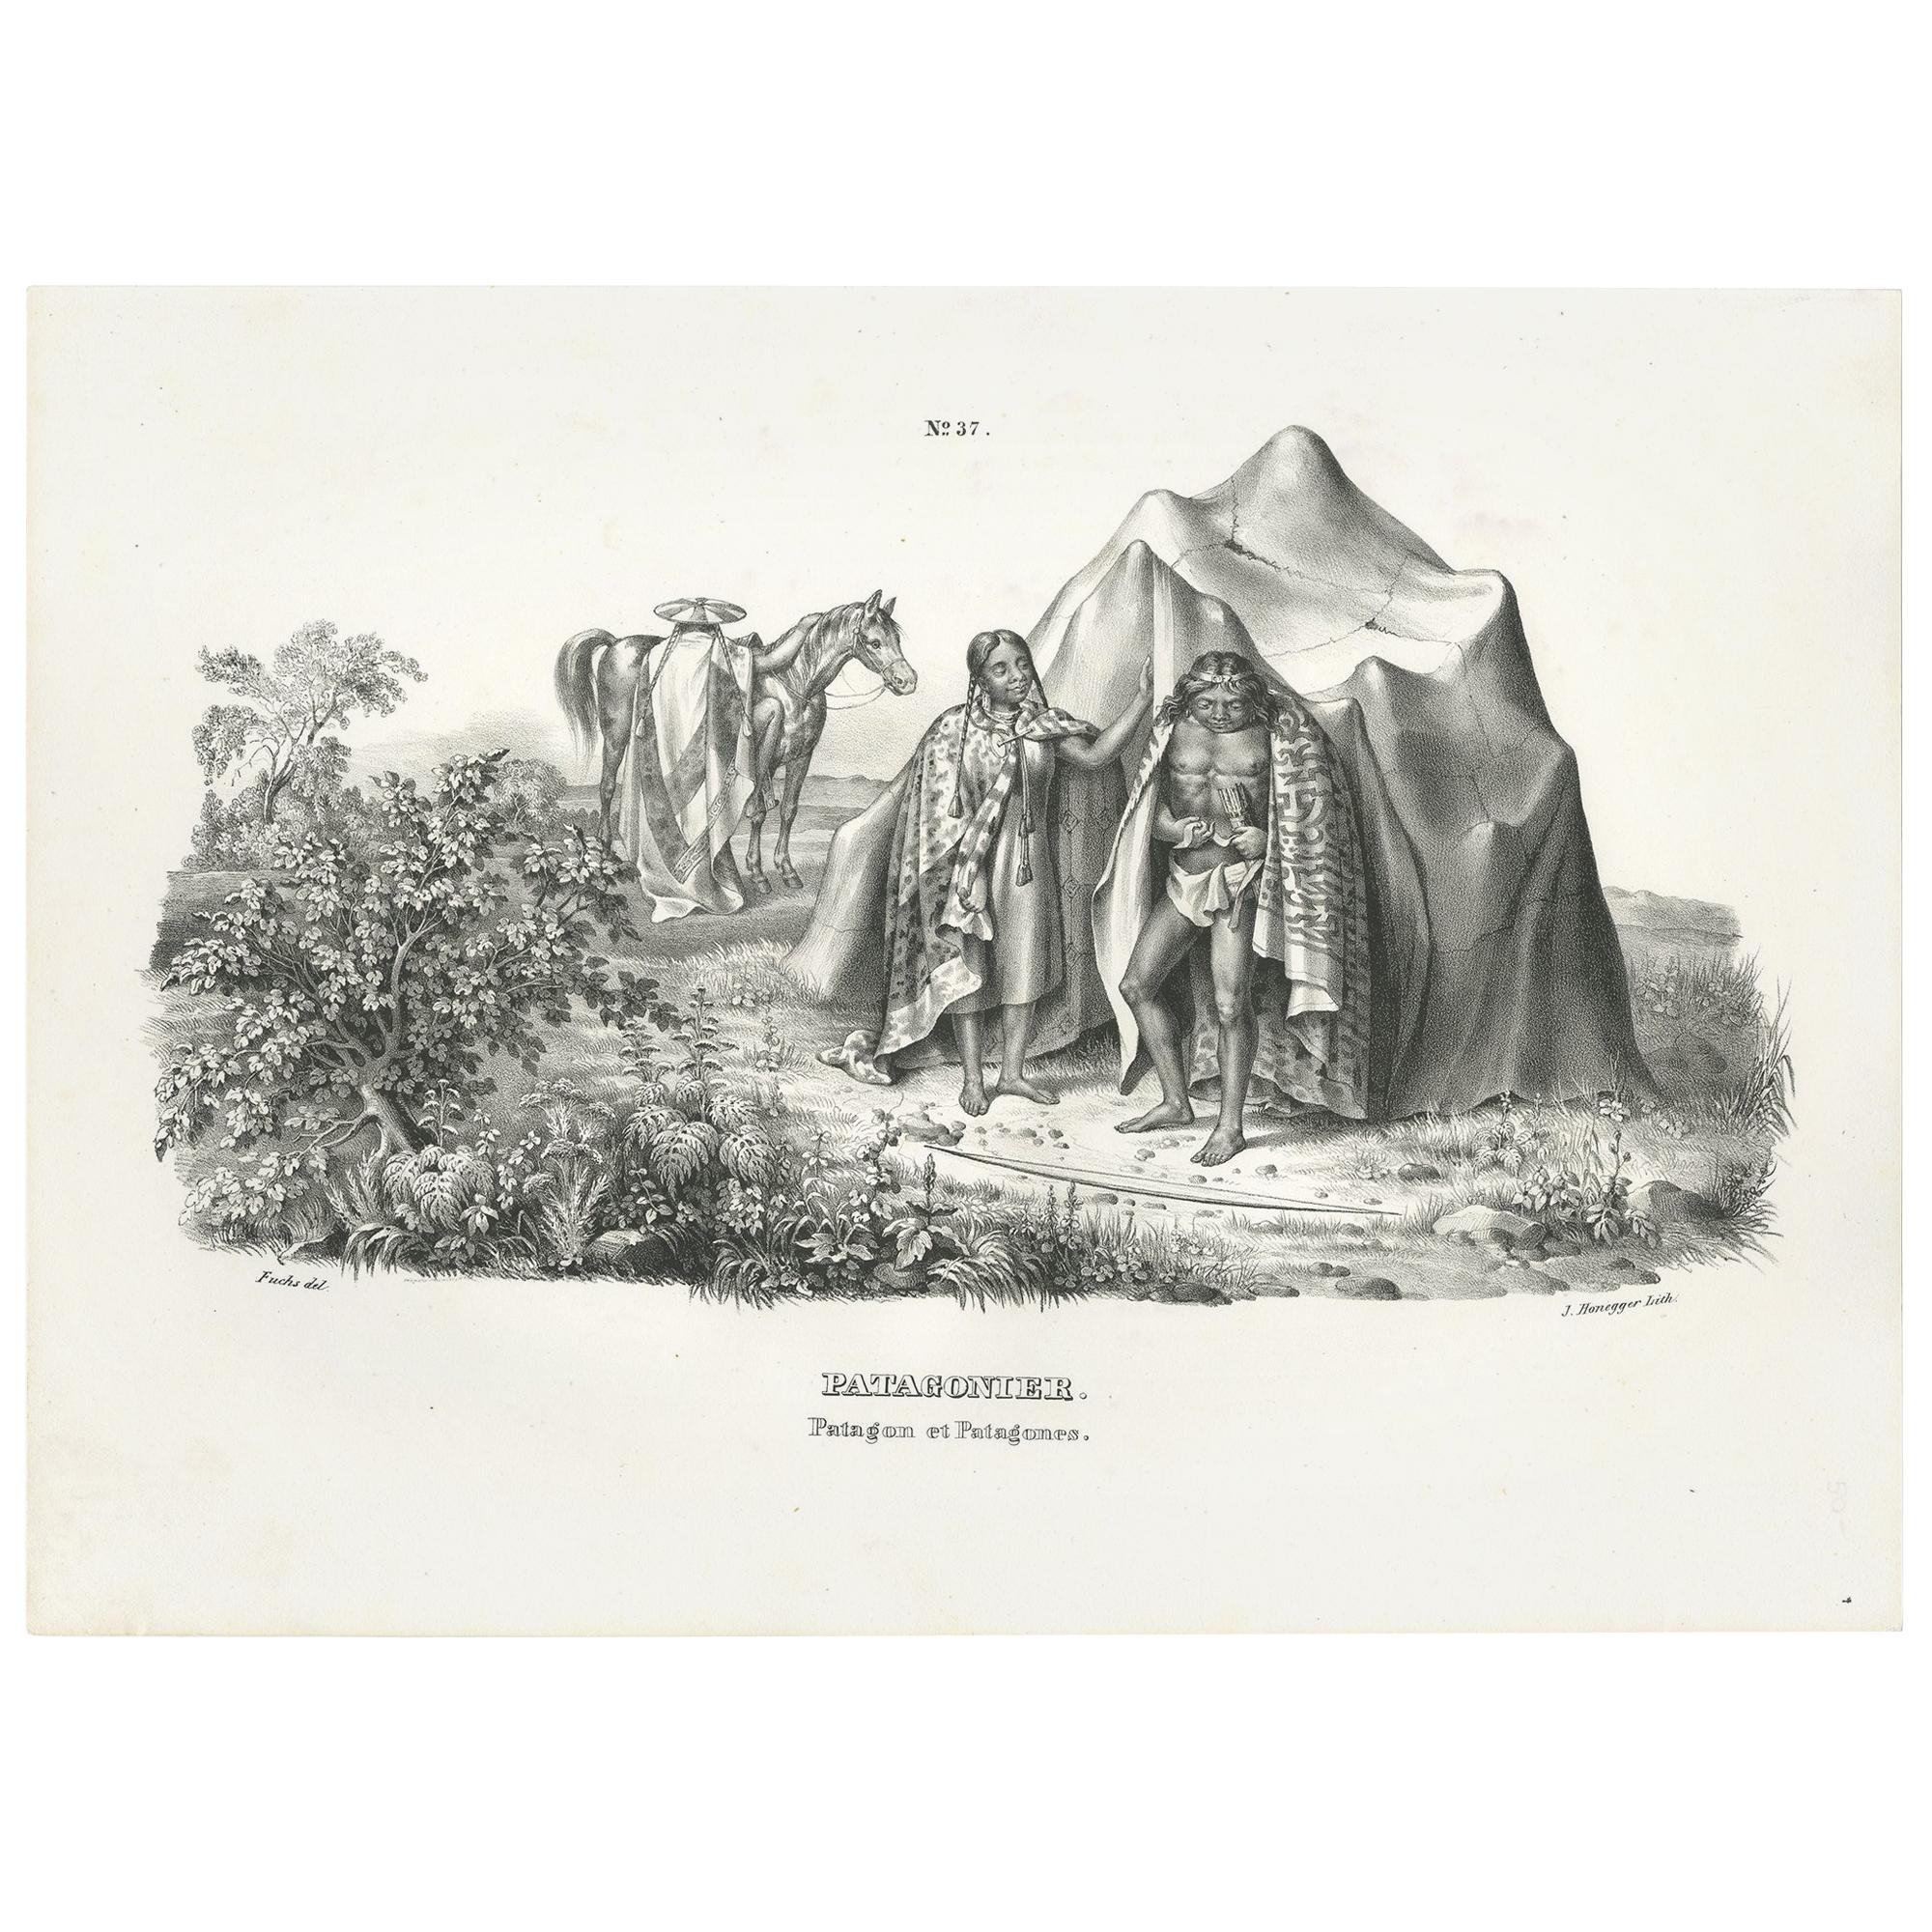 Antique Print of Natives of Patagonia by Honegger (1845)